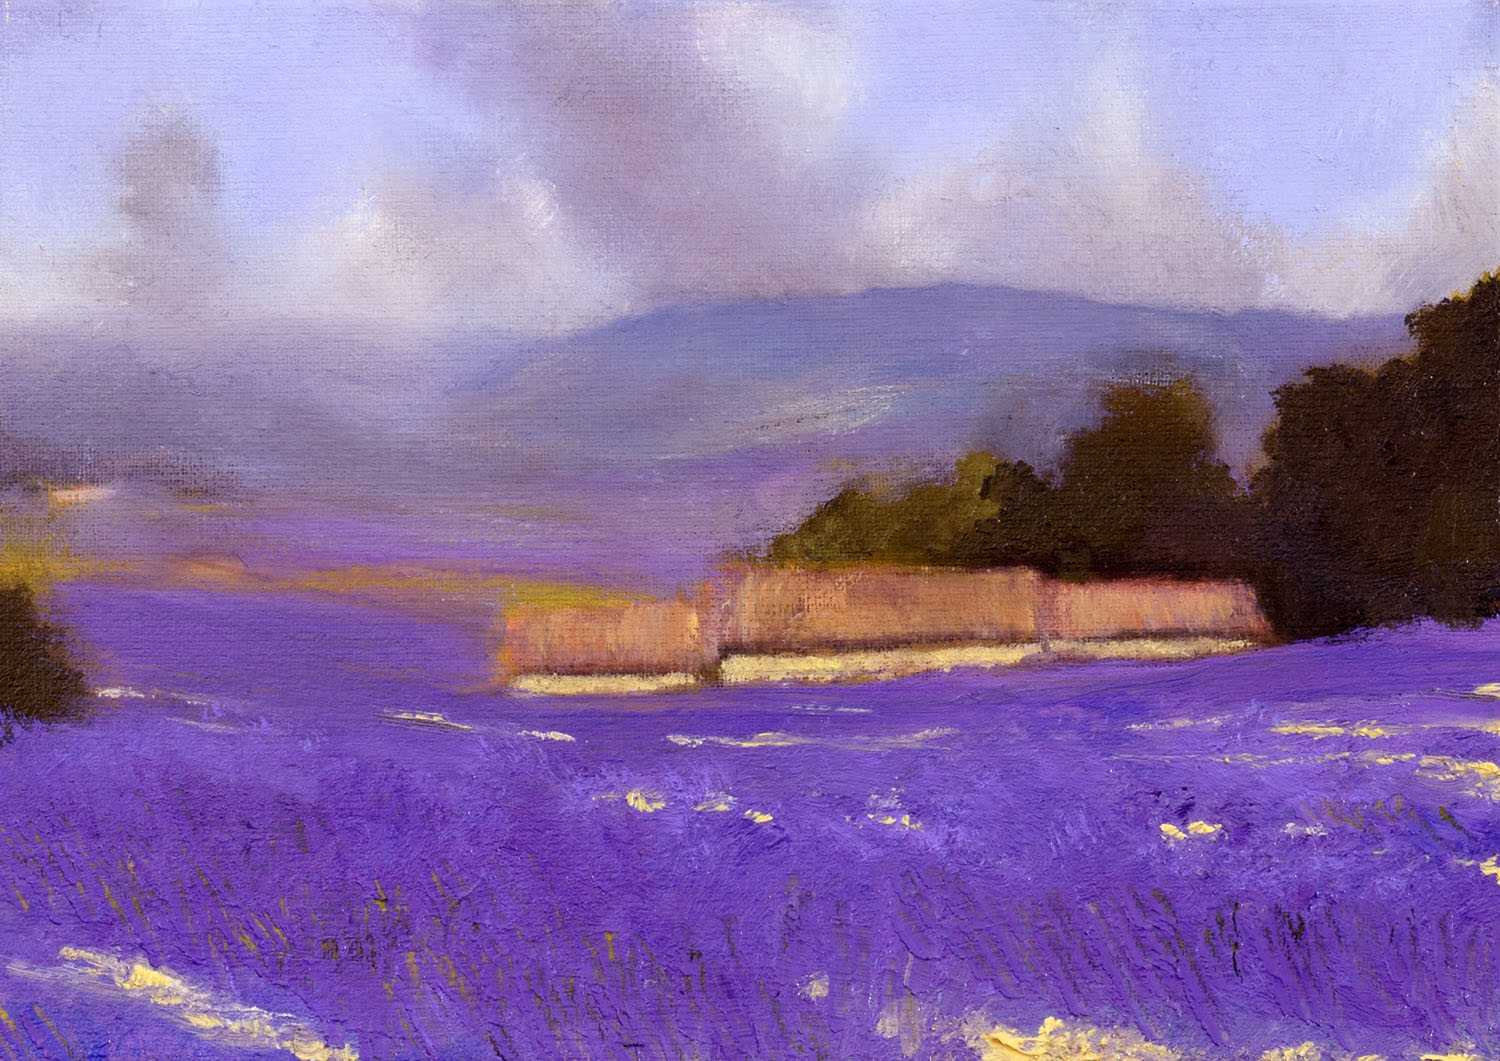 Evening in the Lavender Fields, John O’Grady | The dazzling colour of a lavender field in full bloom